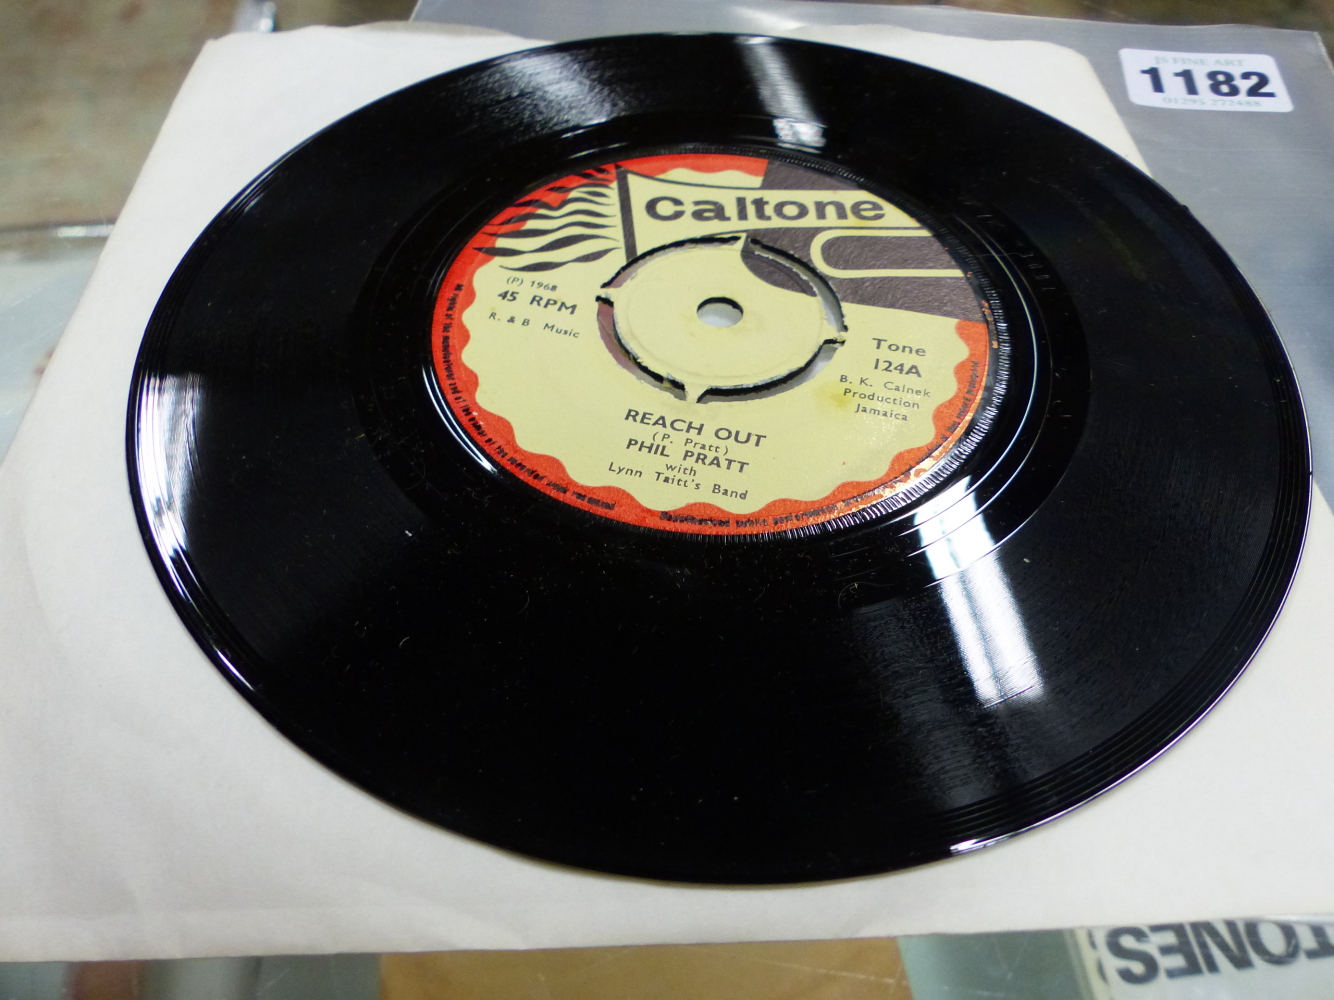 RECORDS. A CALTONE 7" SINGLE, CAT. No. TONE 124, REACH OUT BY PHIL PRATT AND DIRTY DOZEN BY DON D - Image 3 of 5